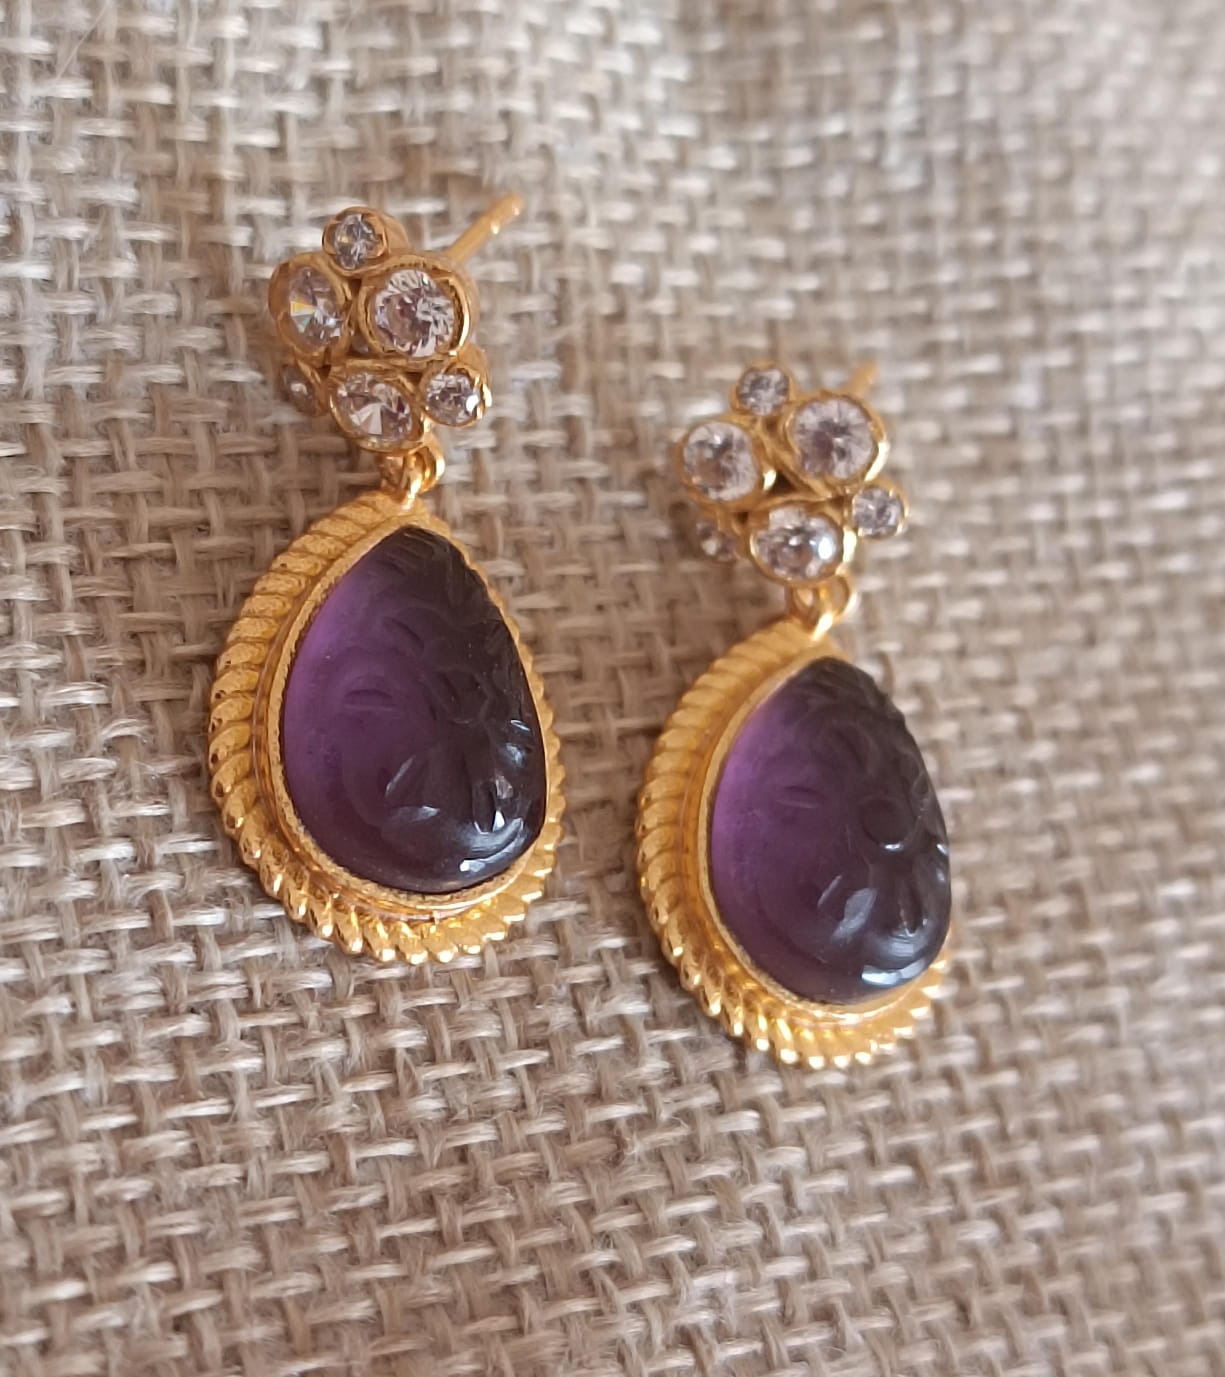 Carved Amethyst earrings with Zircon,
Sterling silver with 1 micron plating.